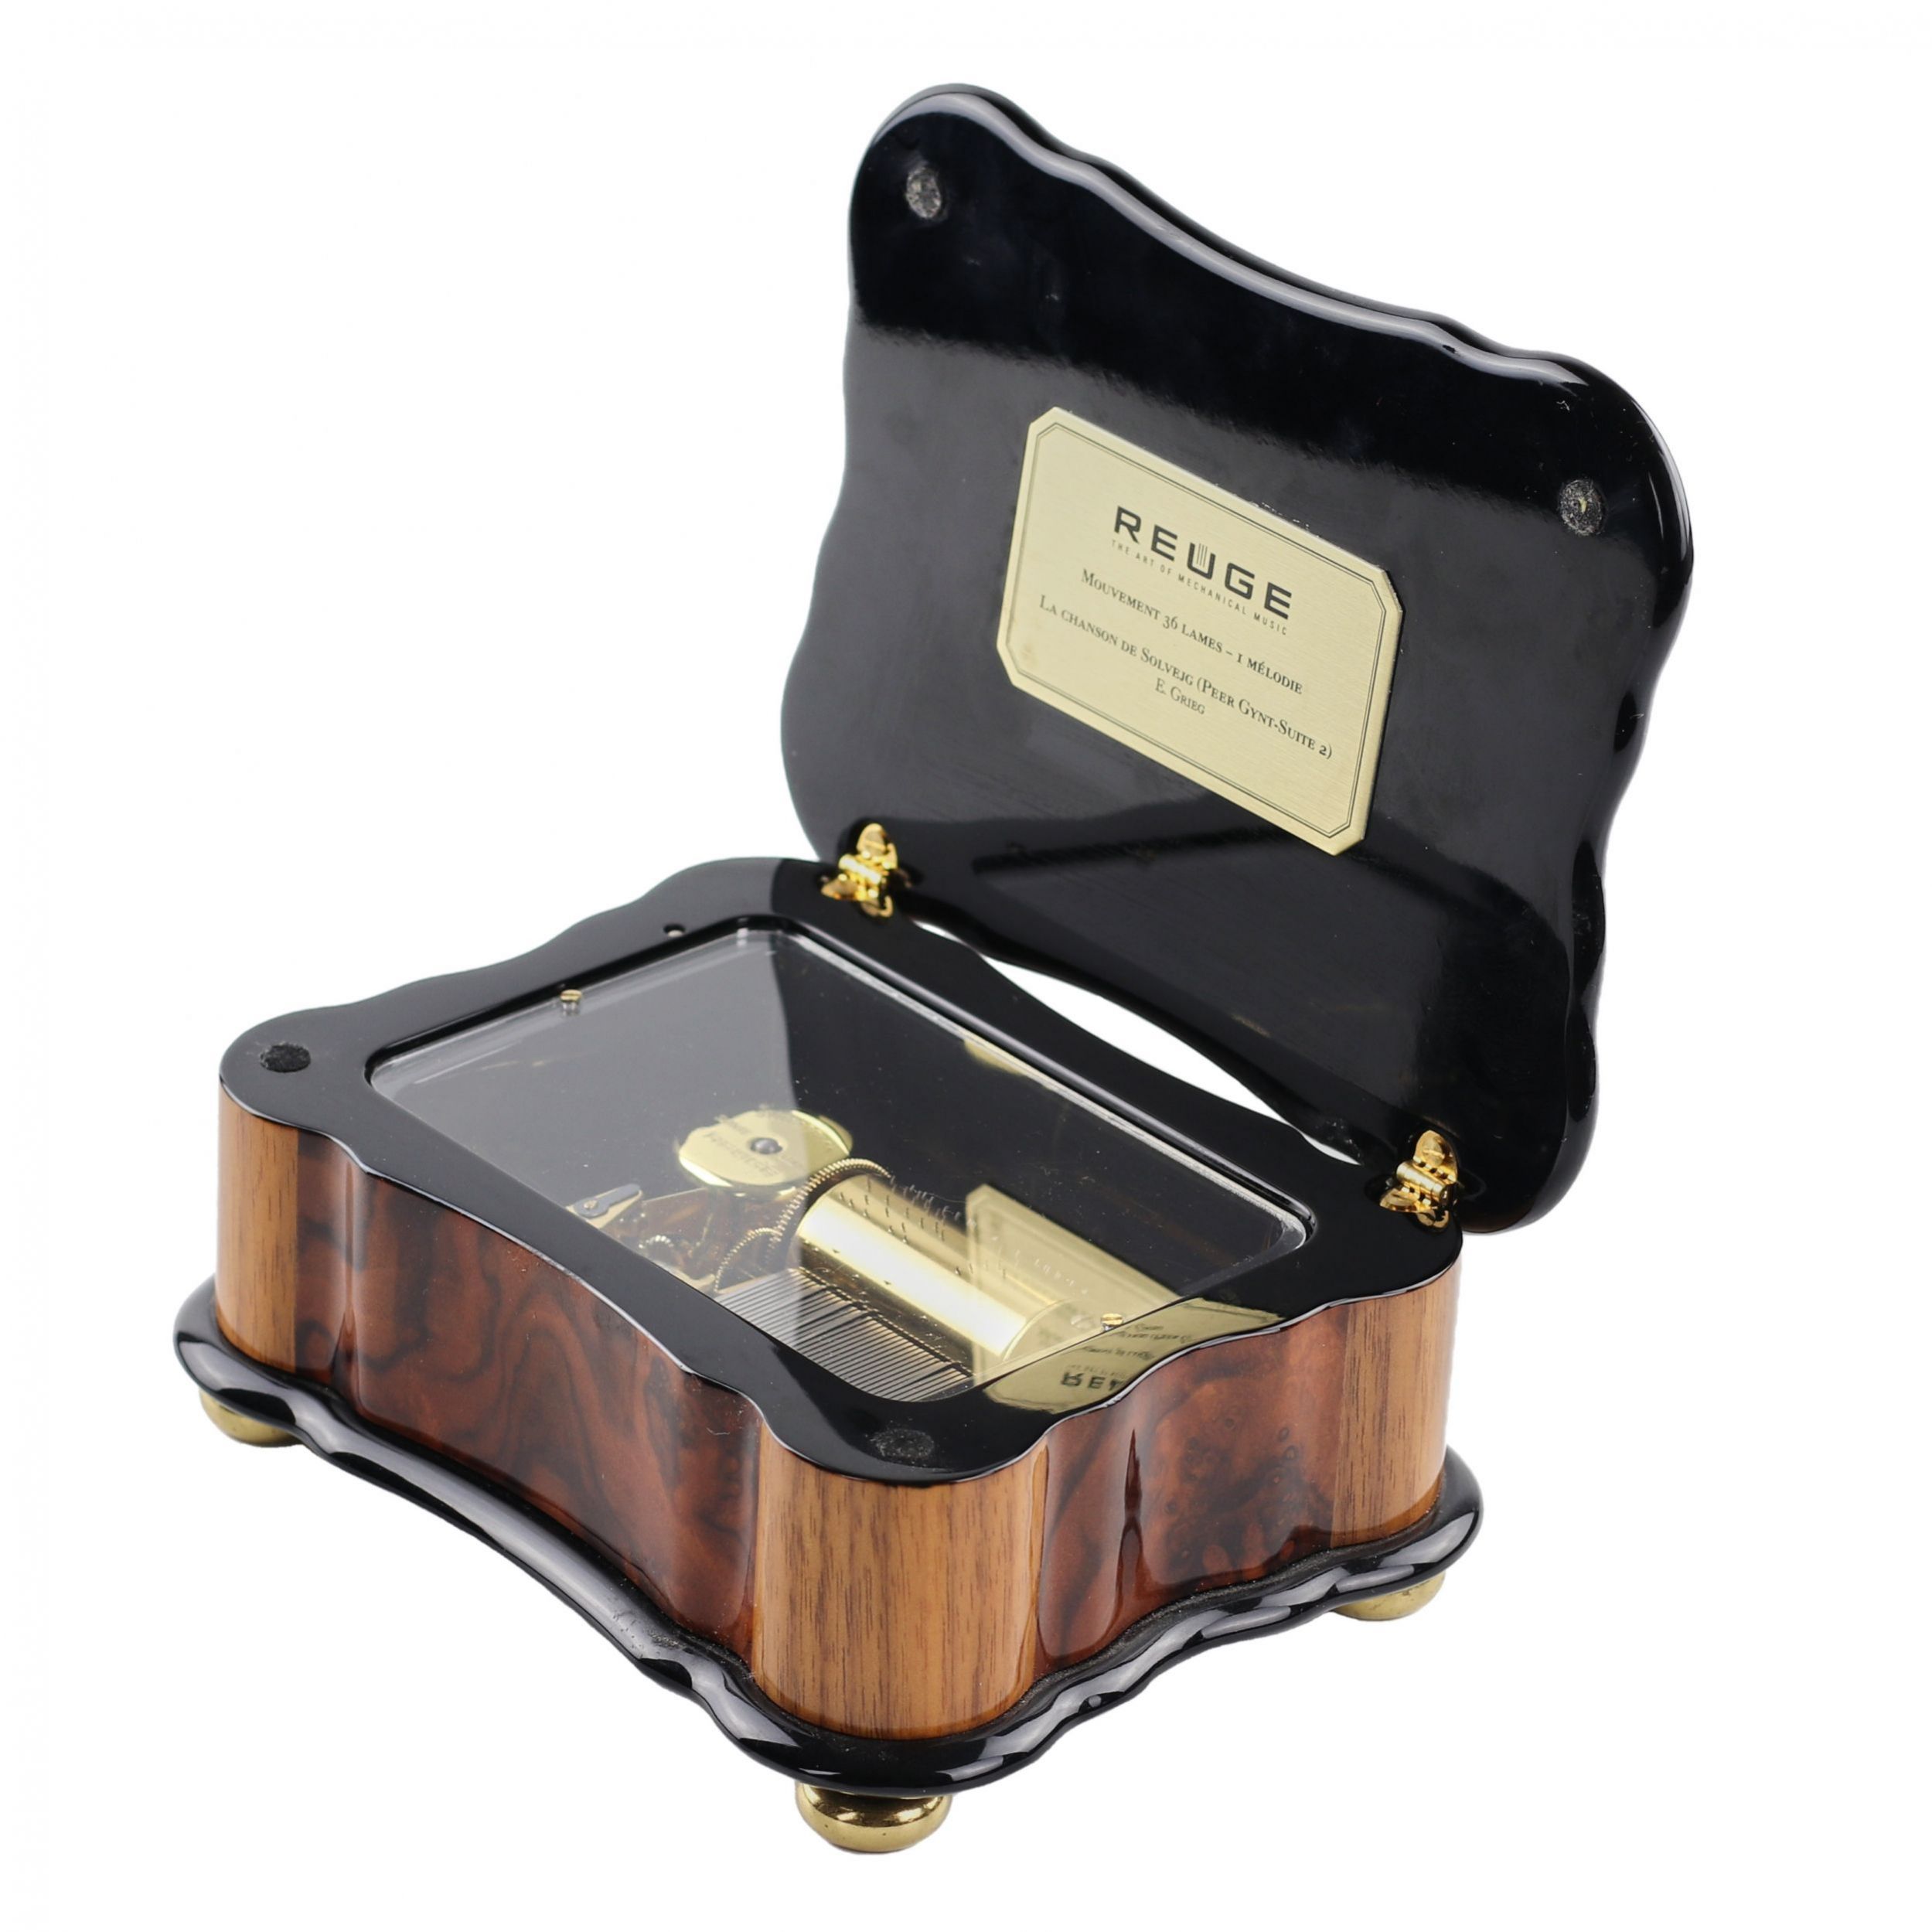 Small-Reuge-music-box-